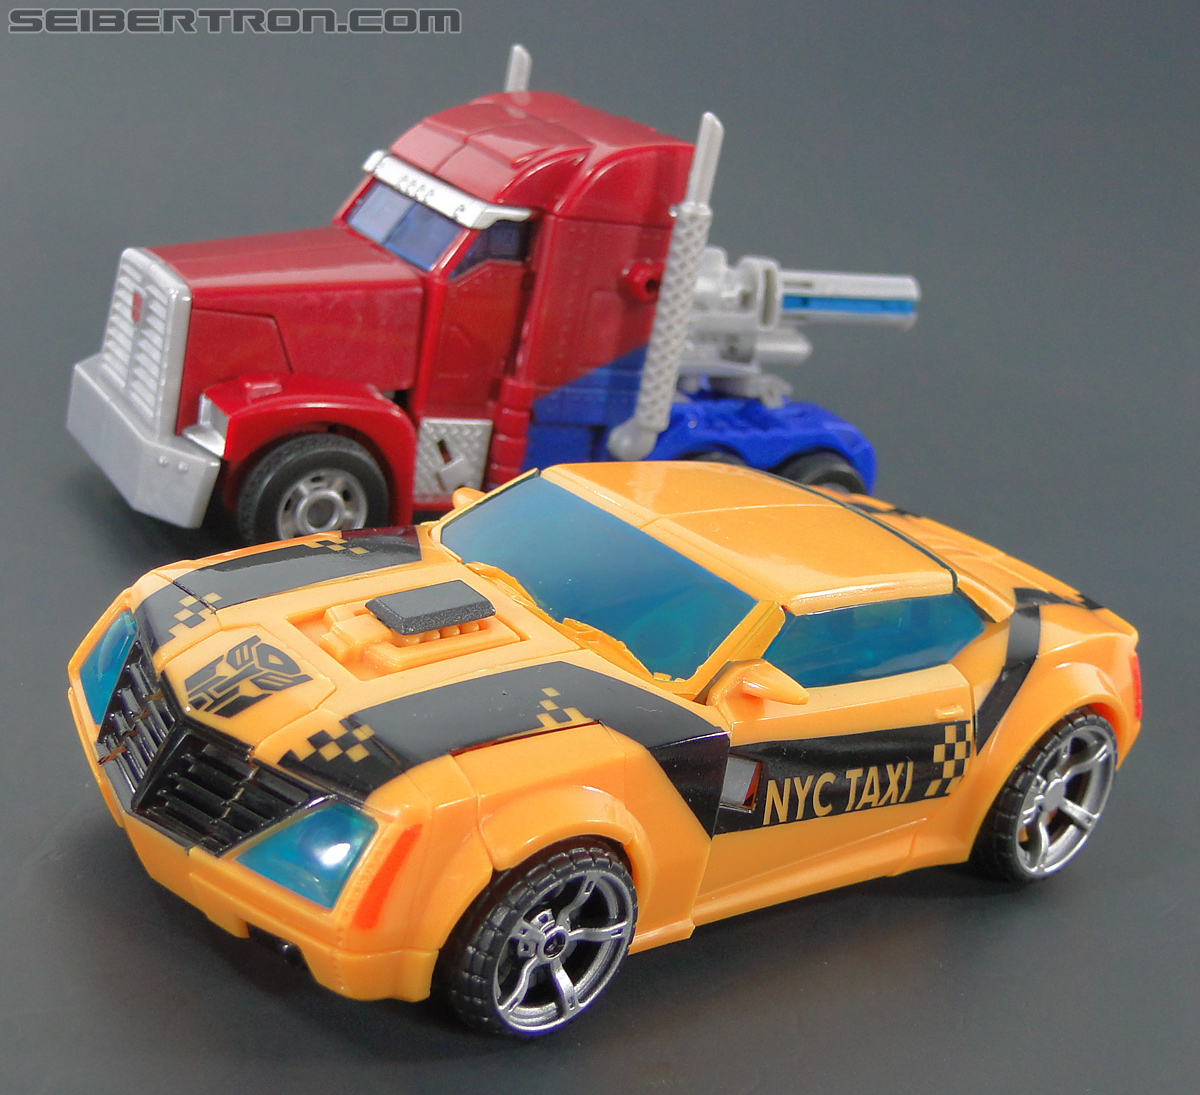 Transformers Prime: First Edition Bumblebee (NYCC) (Image #106 of 185)